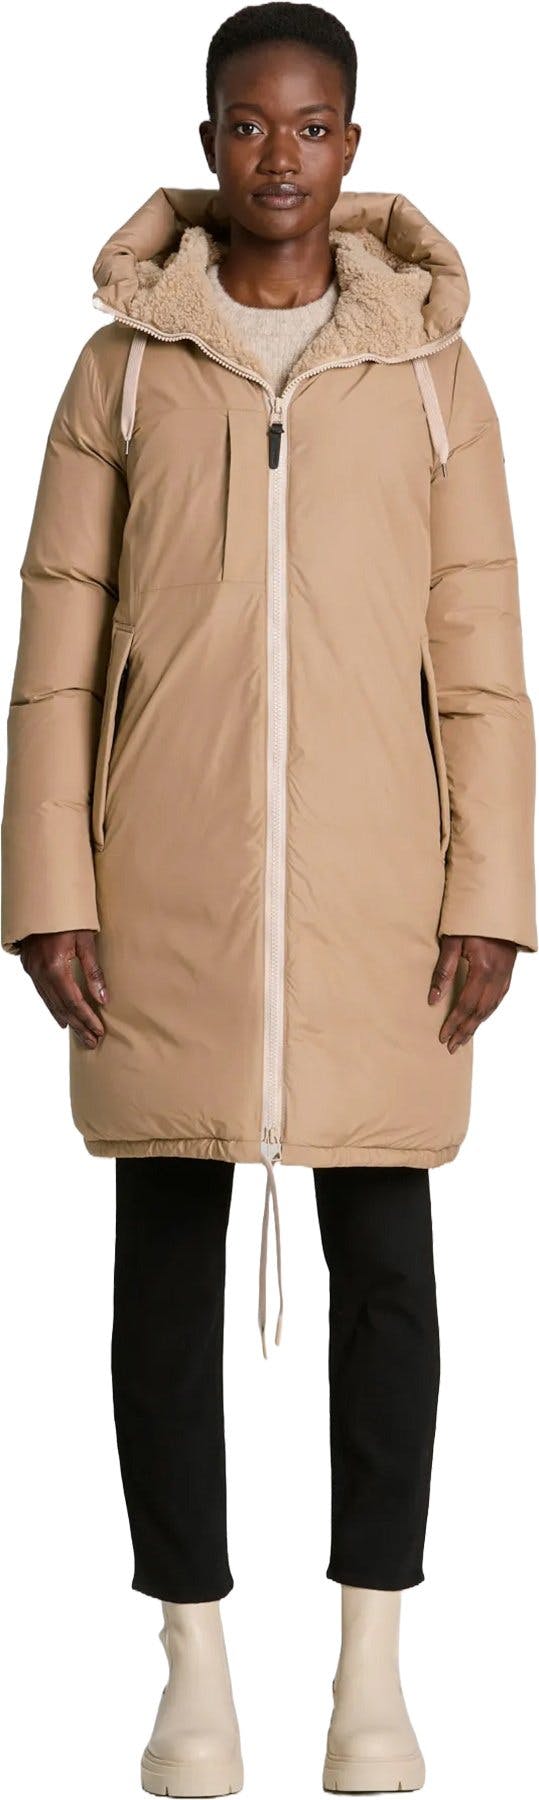 Product image for Meiwa Down Jacket - Women's